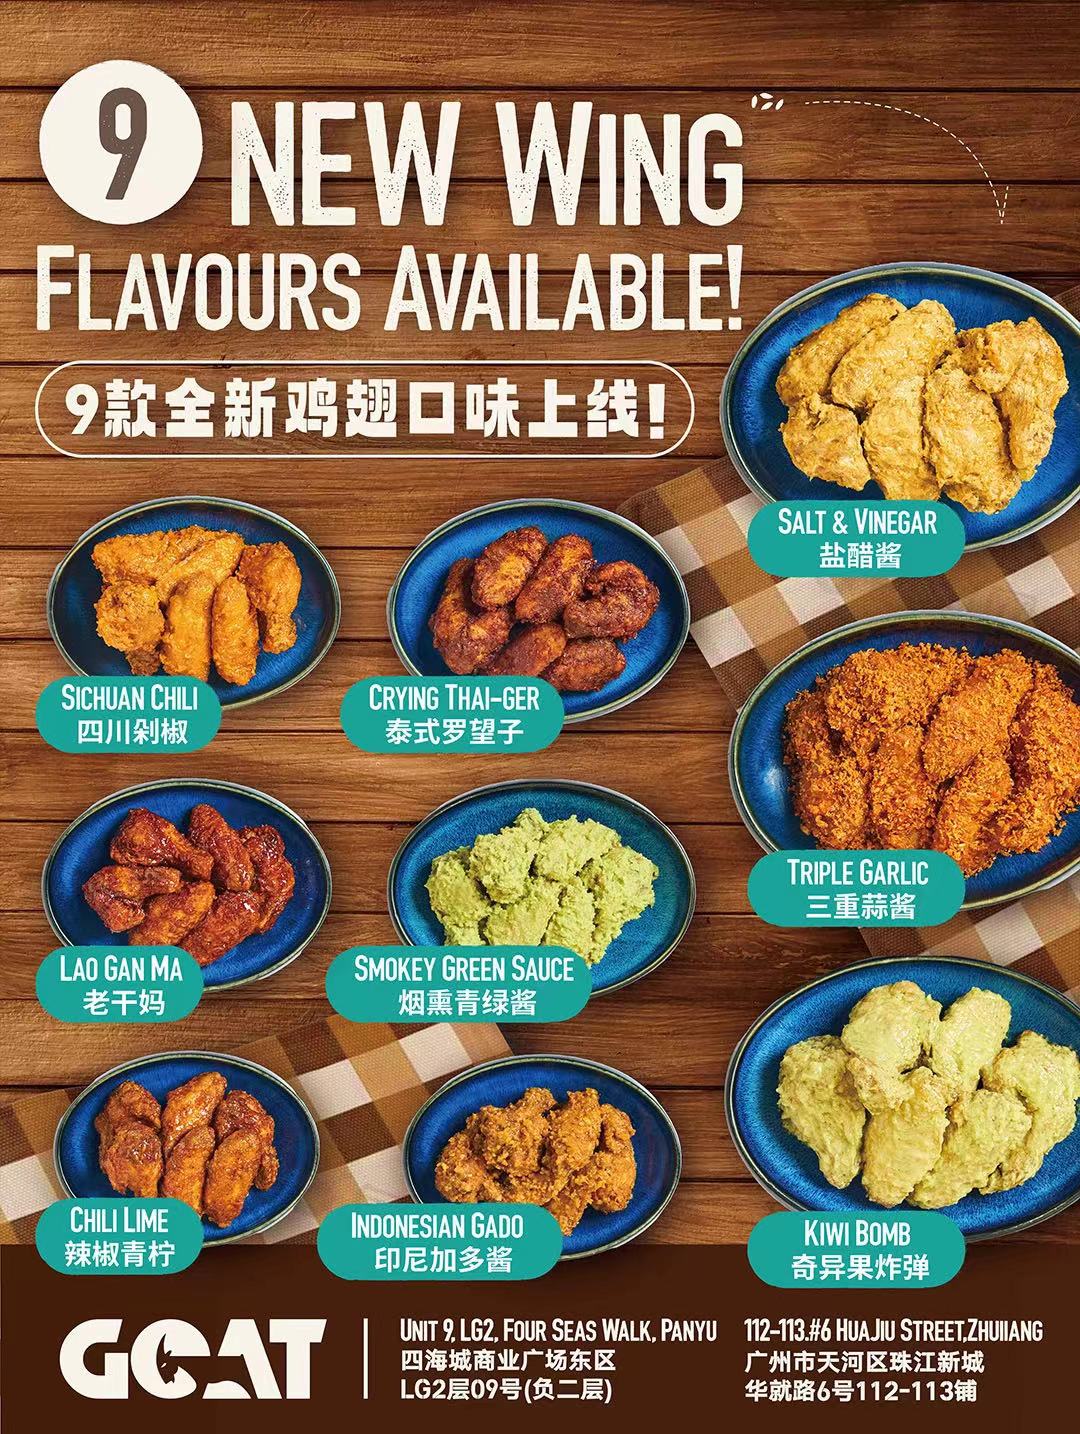 New-Wings-Flavours-Across-the-Globe-at-The-Goat.jpg